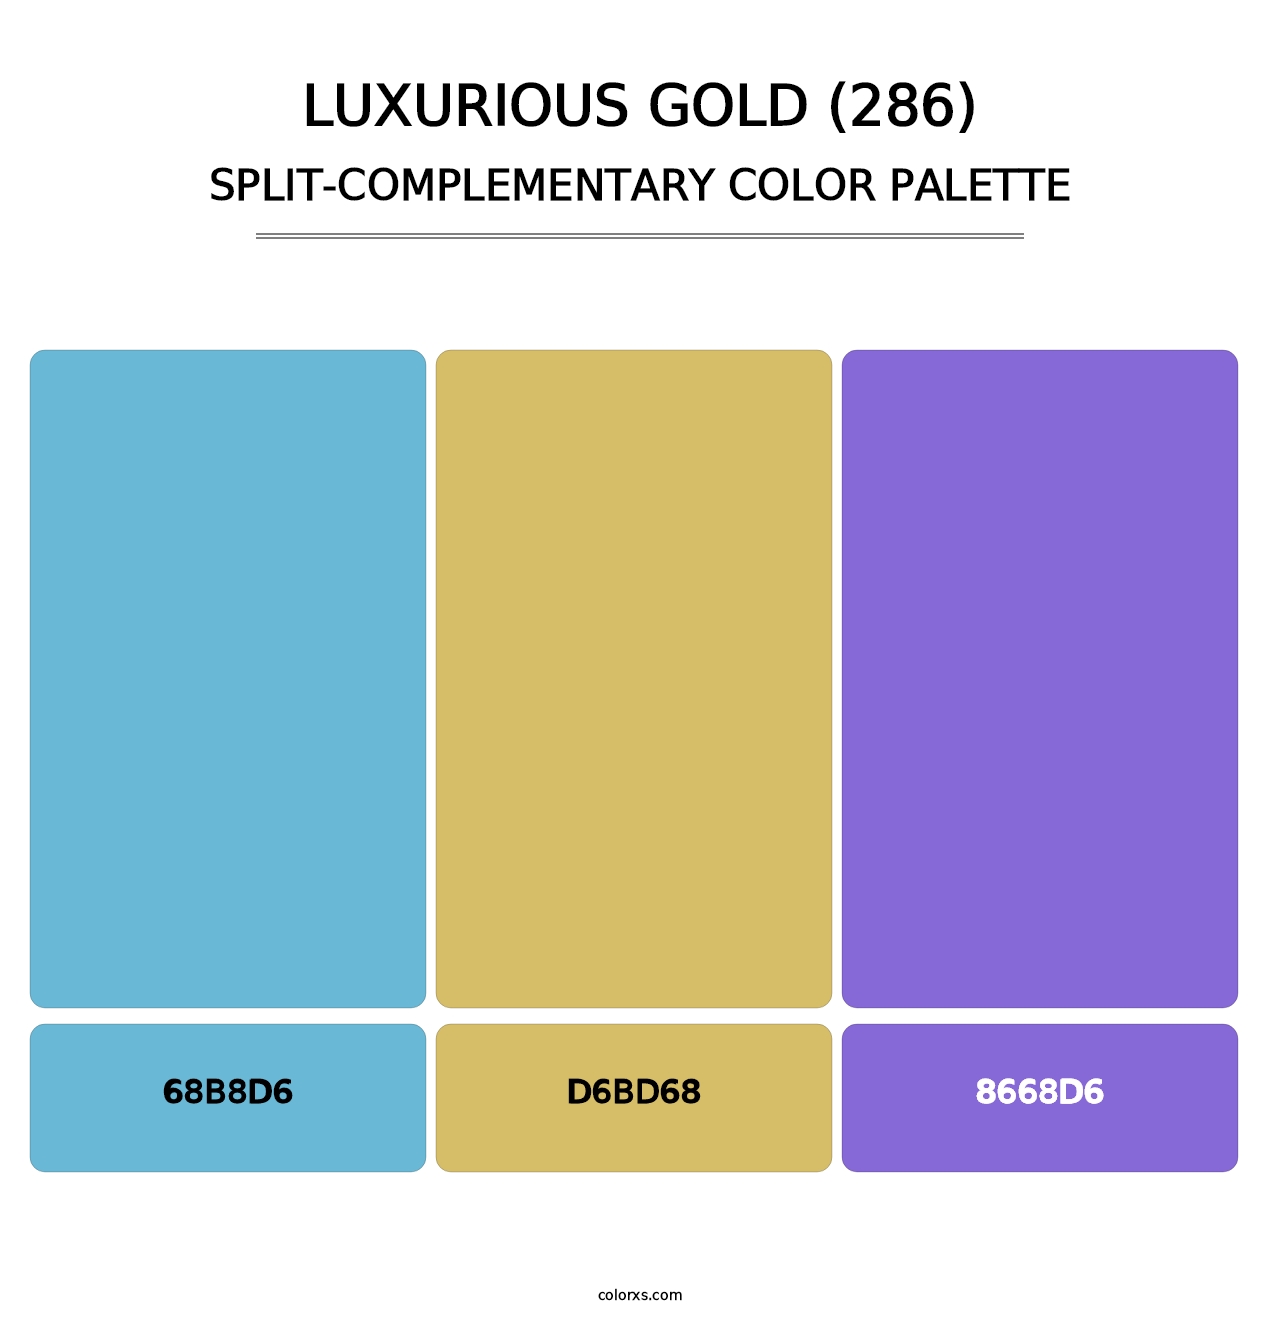 Luxurious Gold (286) - Split-Complementary Color Palette